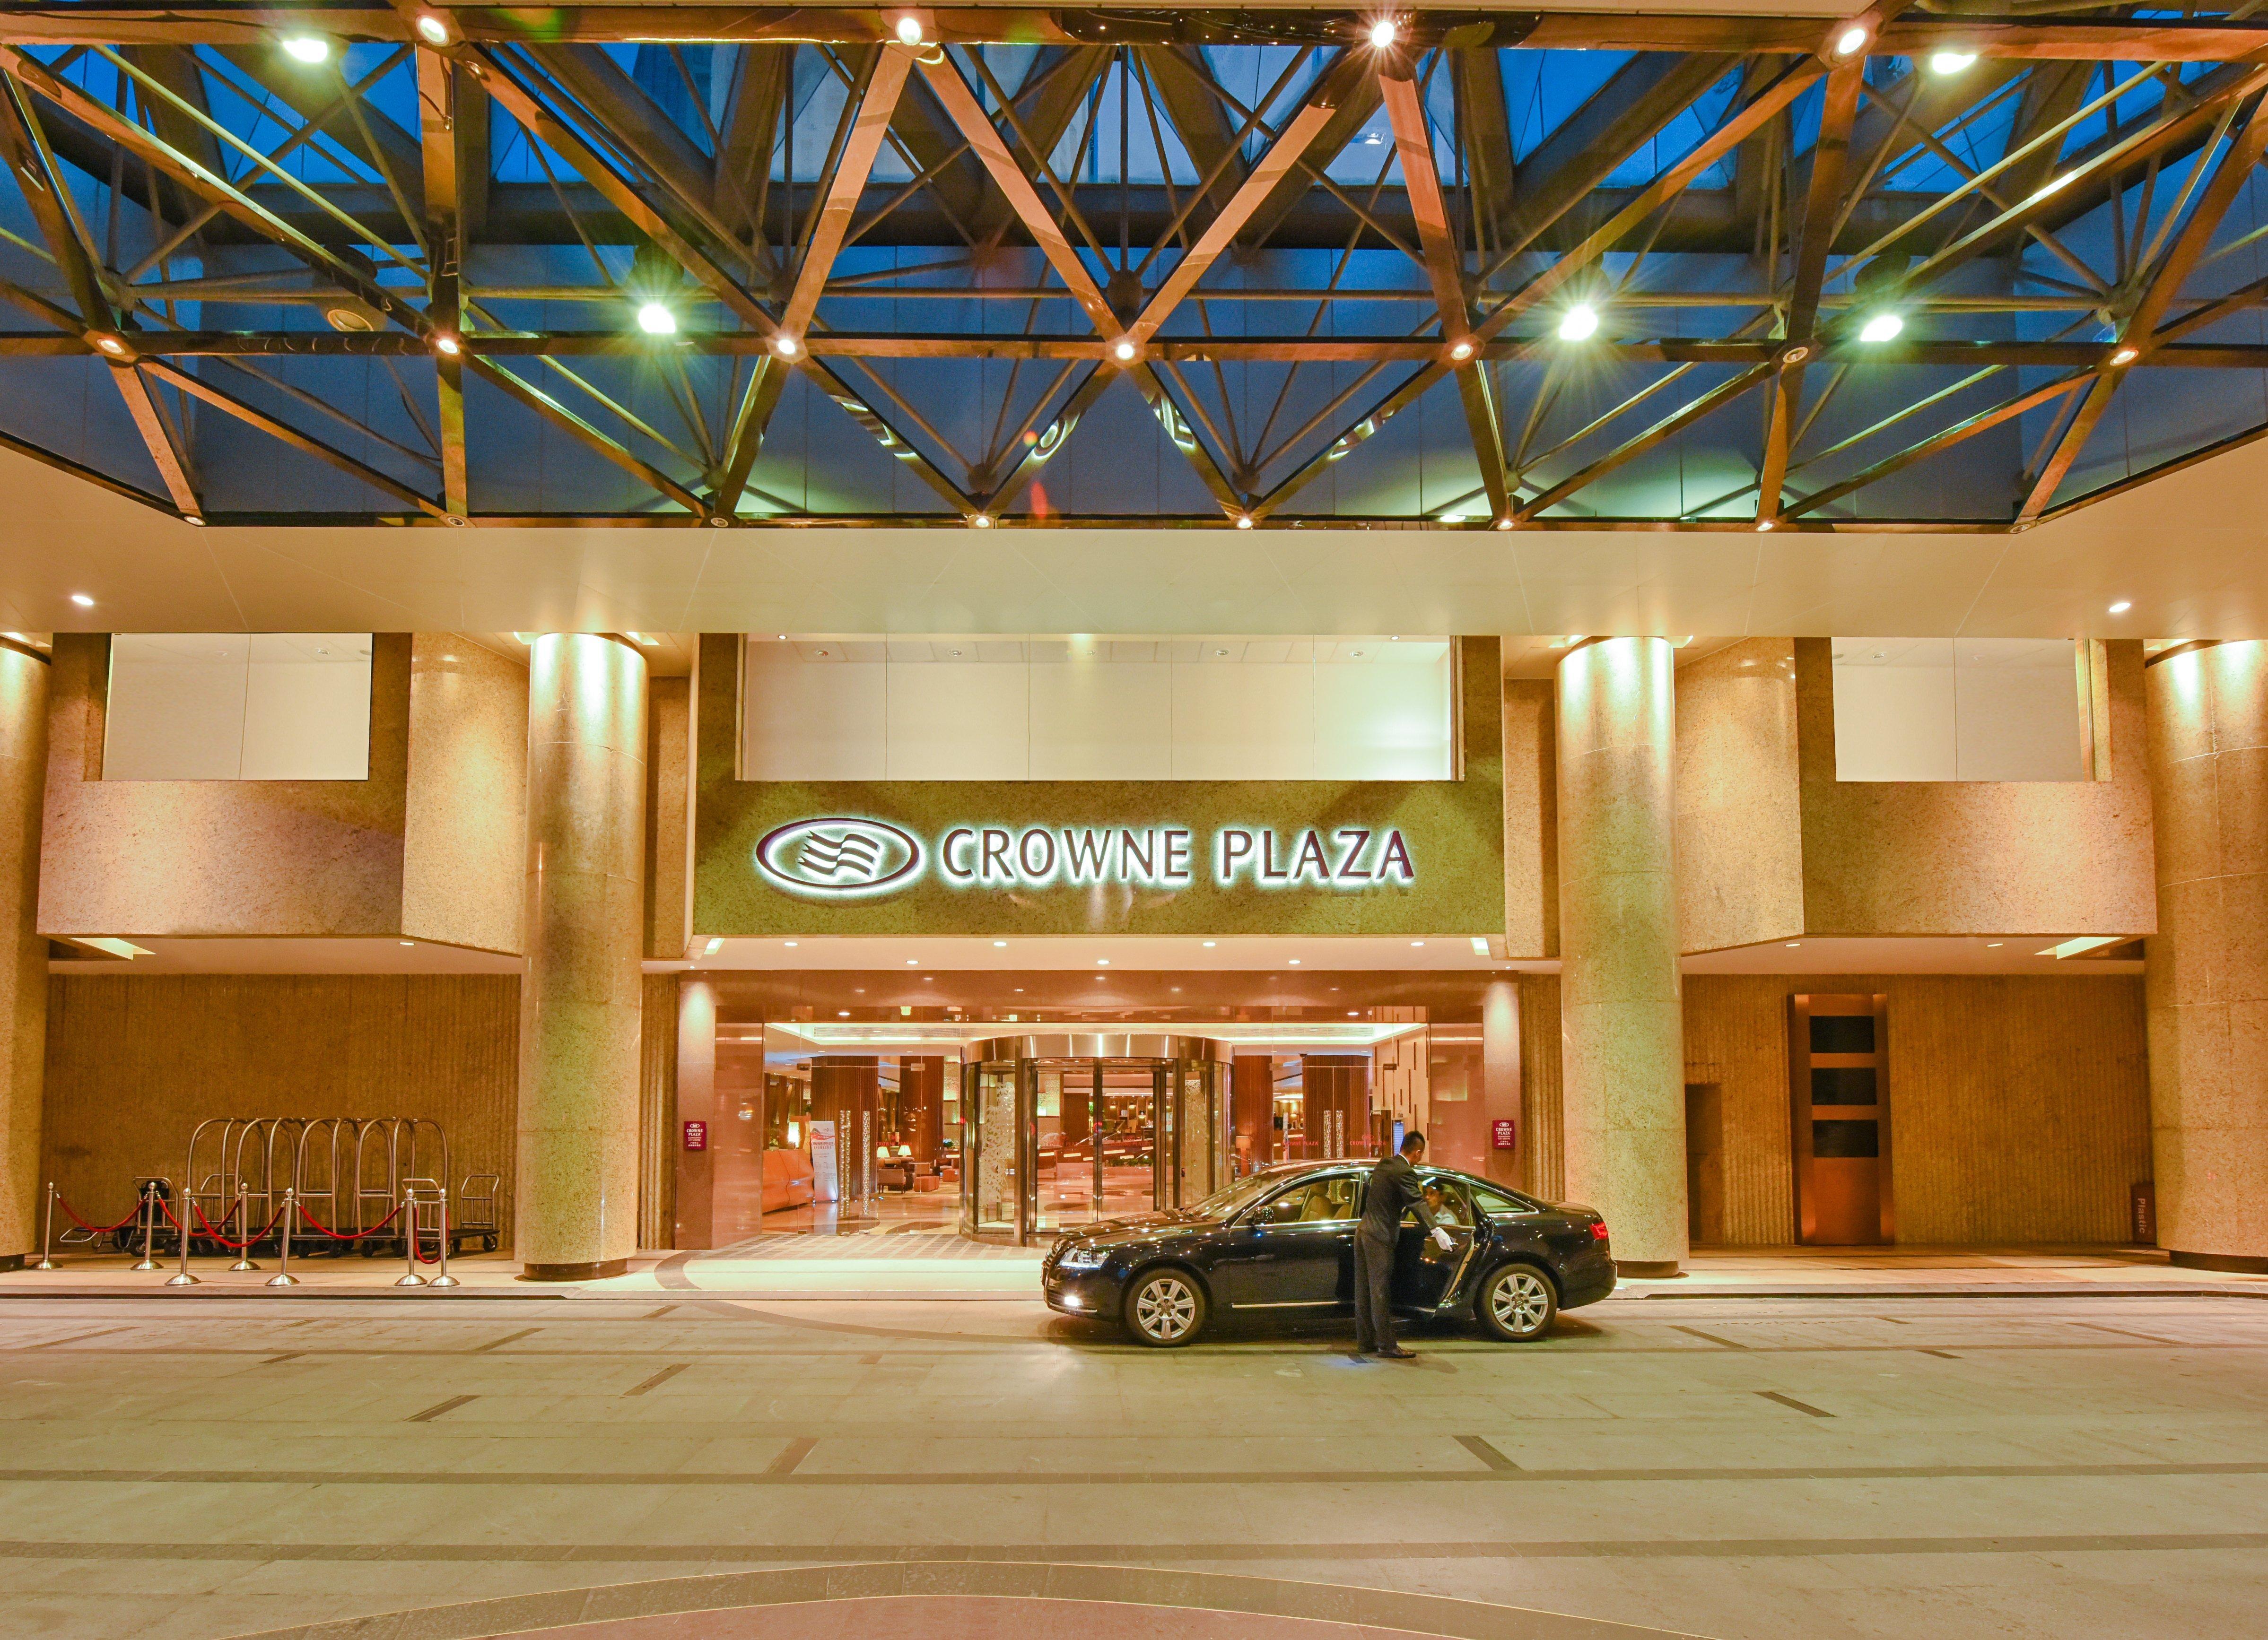 Crowne Plaza Guangzhou City Centre, An Ihg Hotel - Free Canton Fair Shuttle Bus And Registration Counter Exterior foto